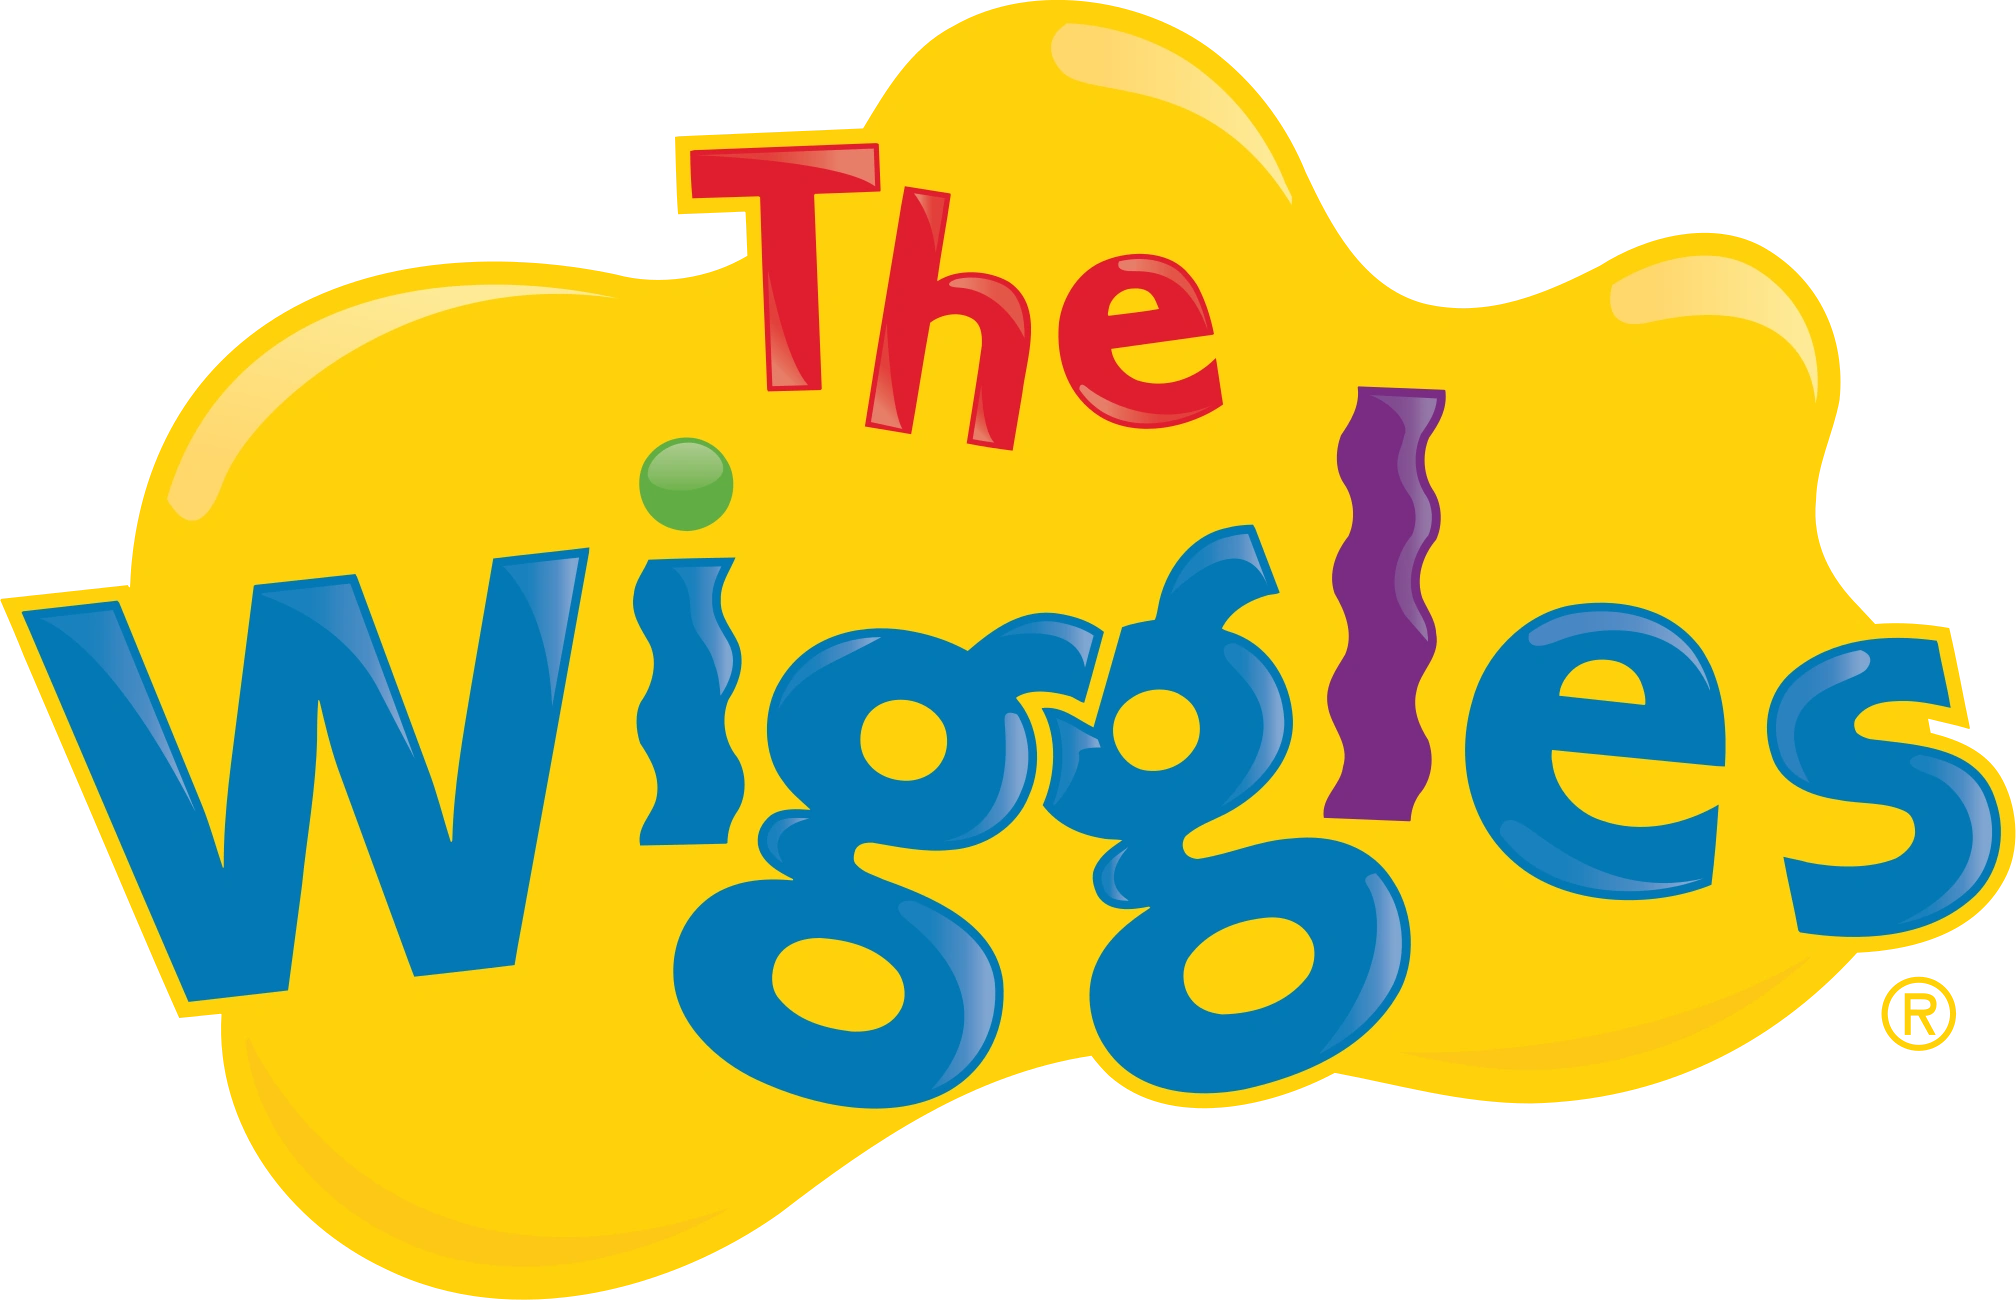 TheWigglesLogo.png